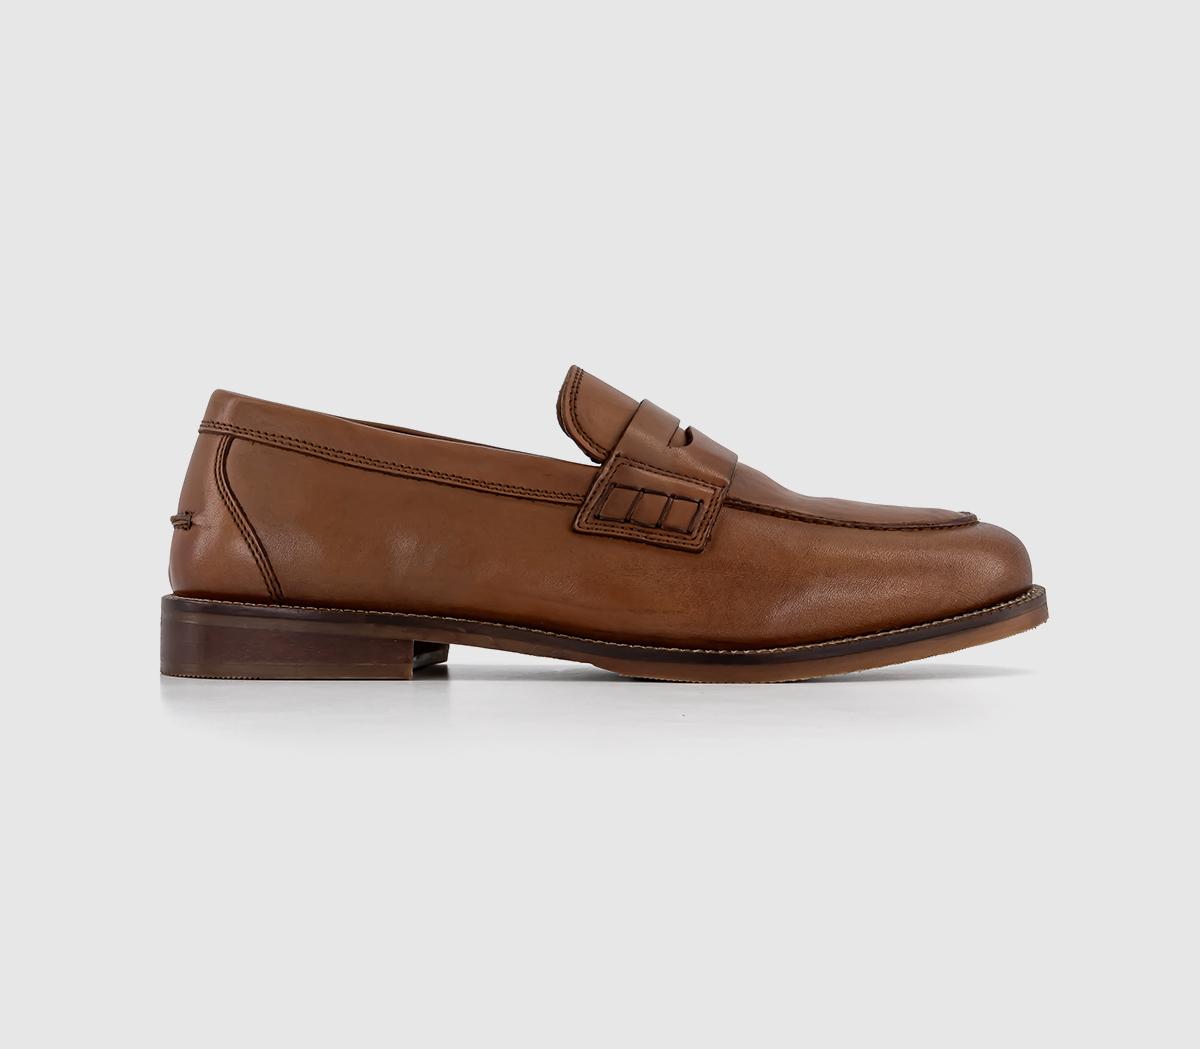 OFFICEMarlborough Penny LoafersTan Leather